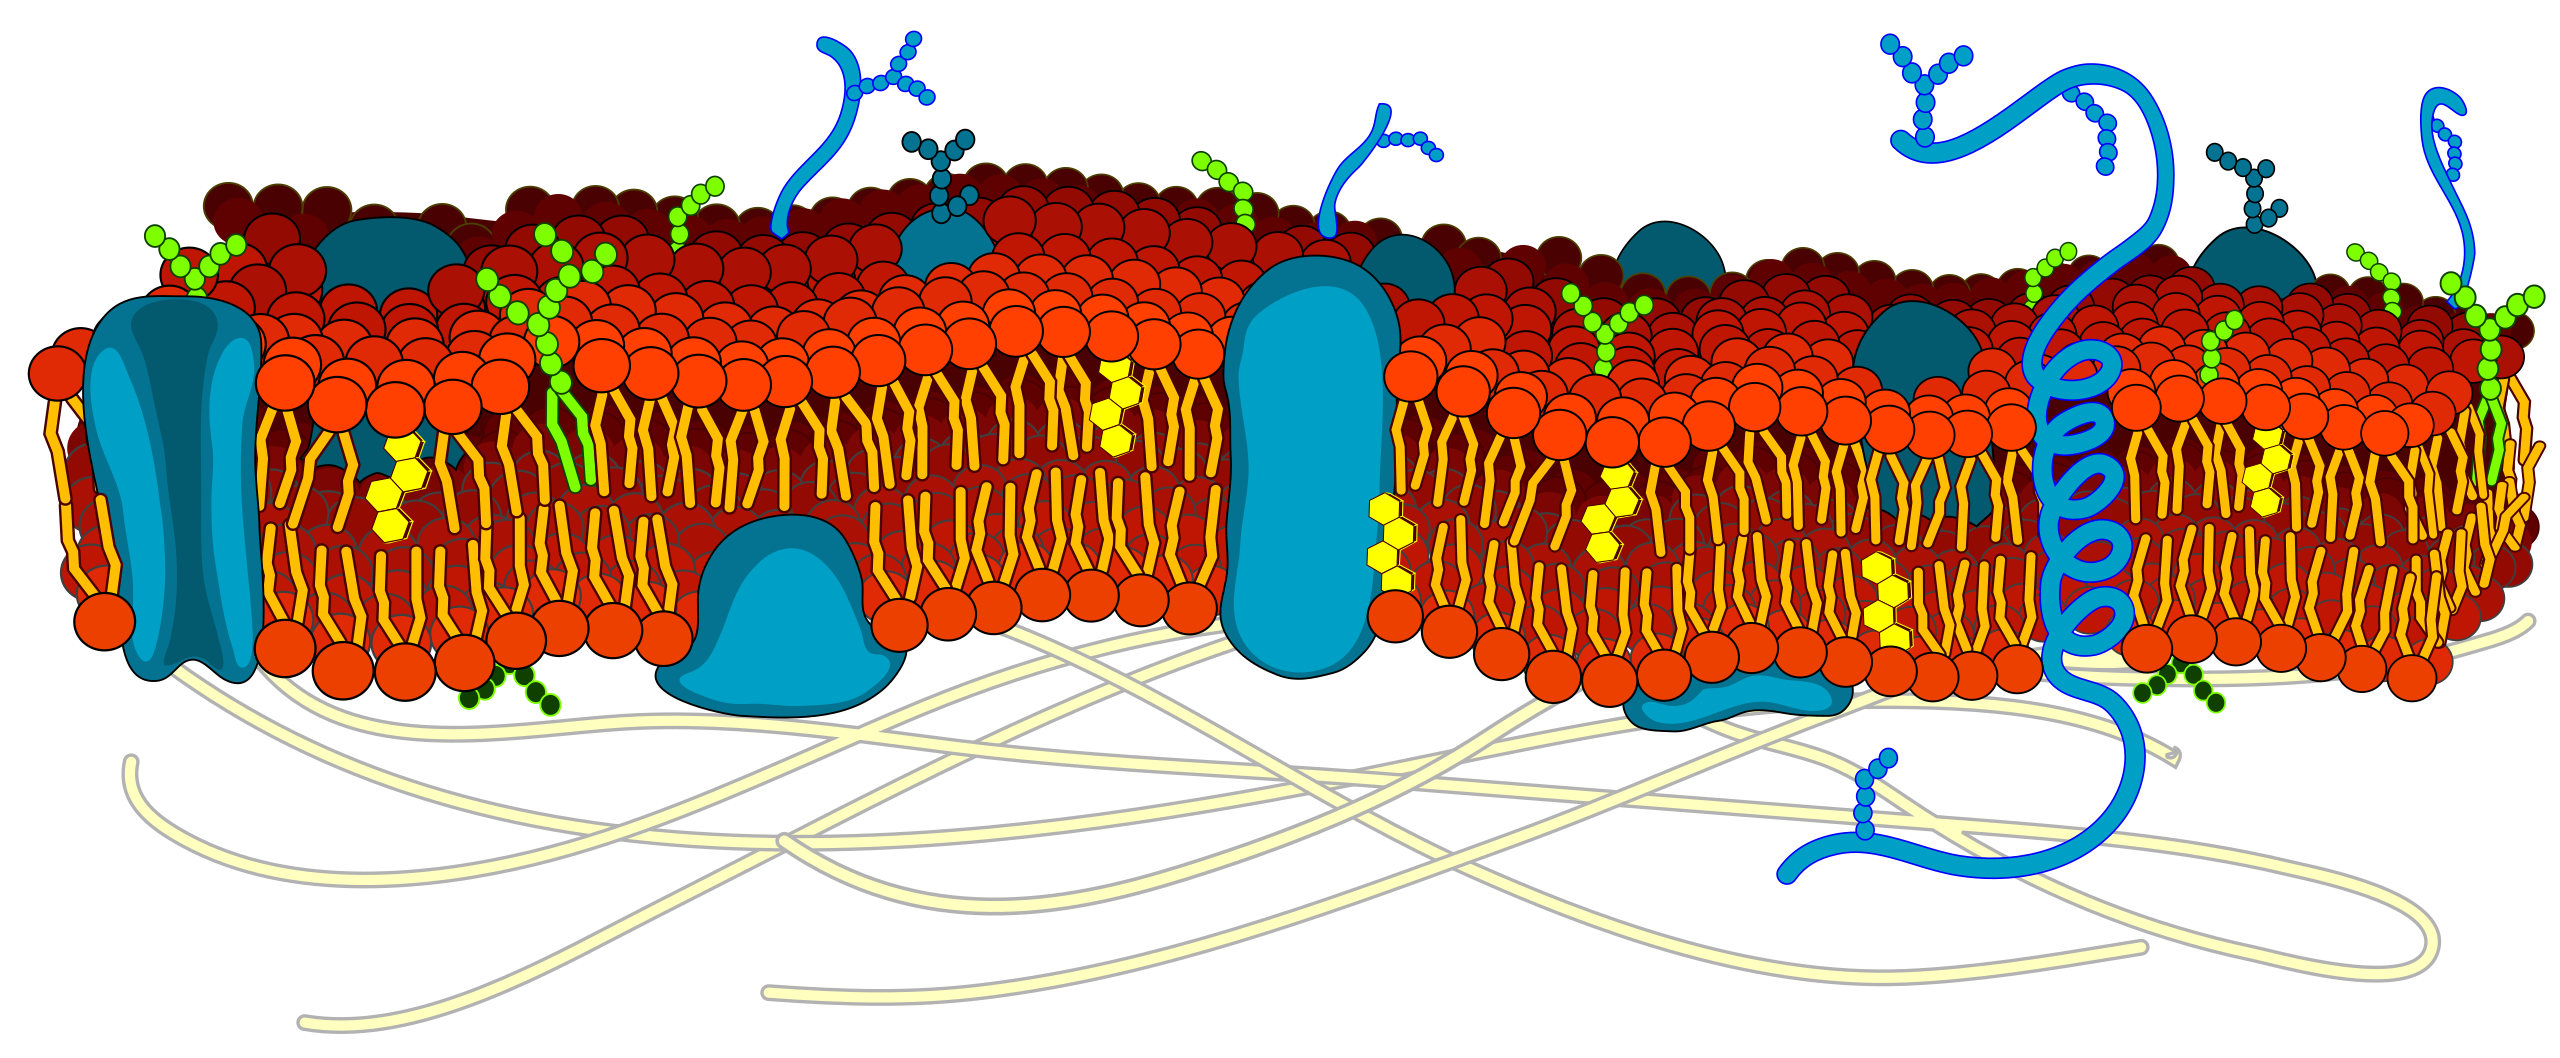 The plasma membrane, composed of a phospholipid bilayer, proteins, and carbohydrates